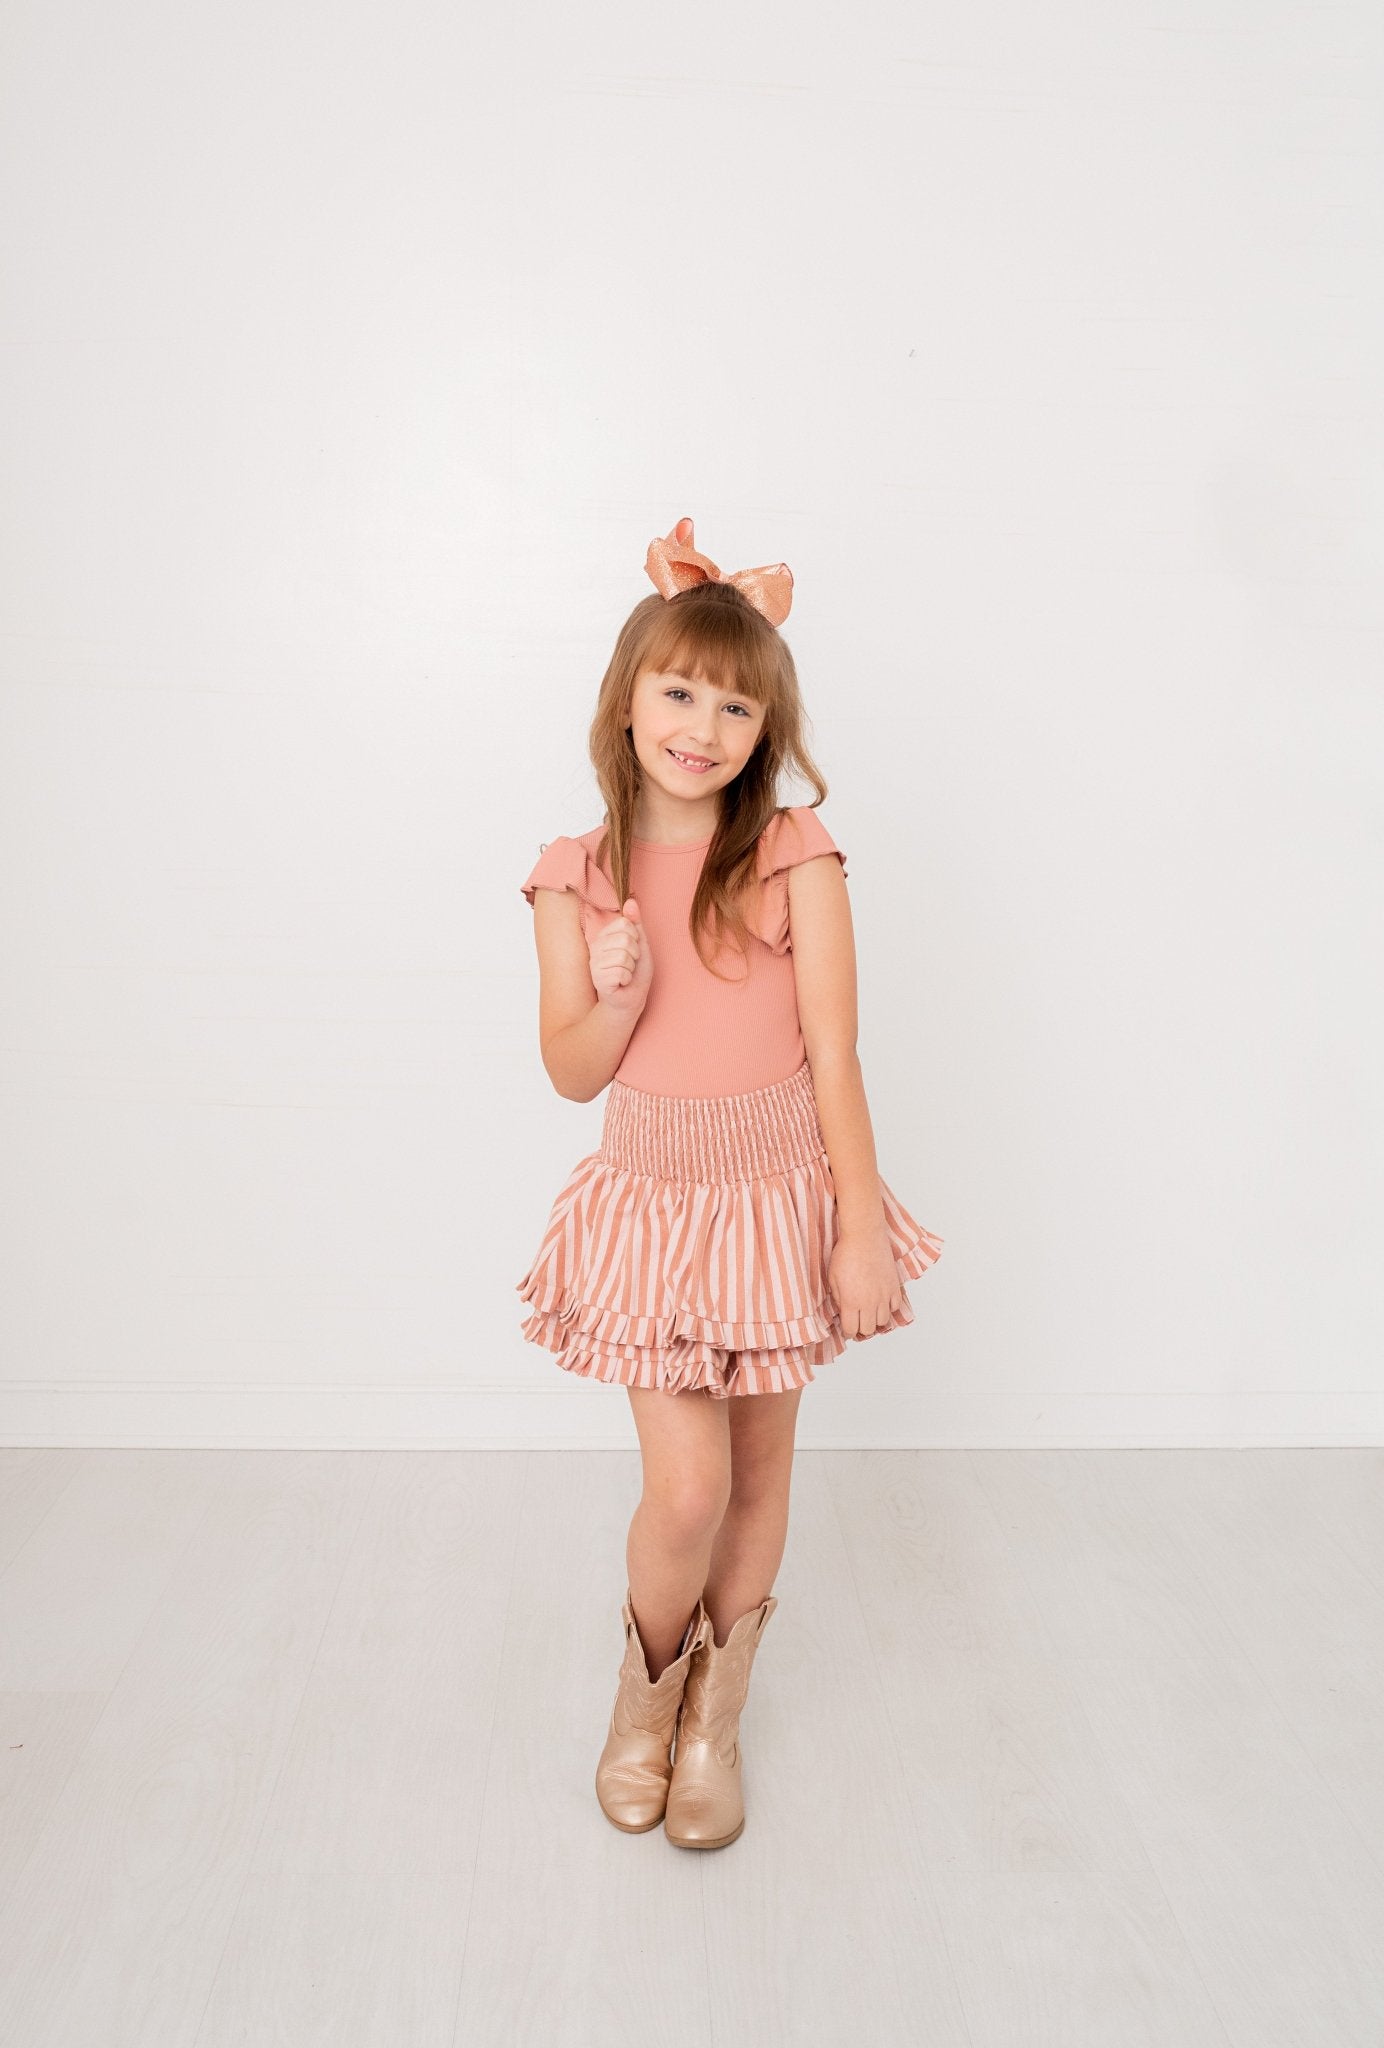 Southern Twirl Blush and Rose Bodysuit/Leotard and Skirt Simplicity Set - Evie's Closet Clothing